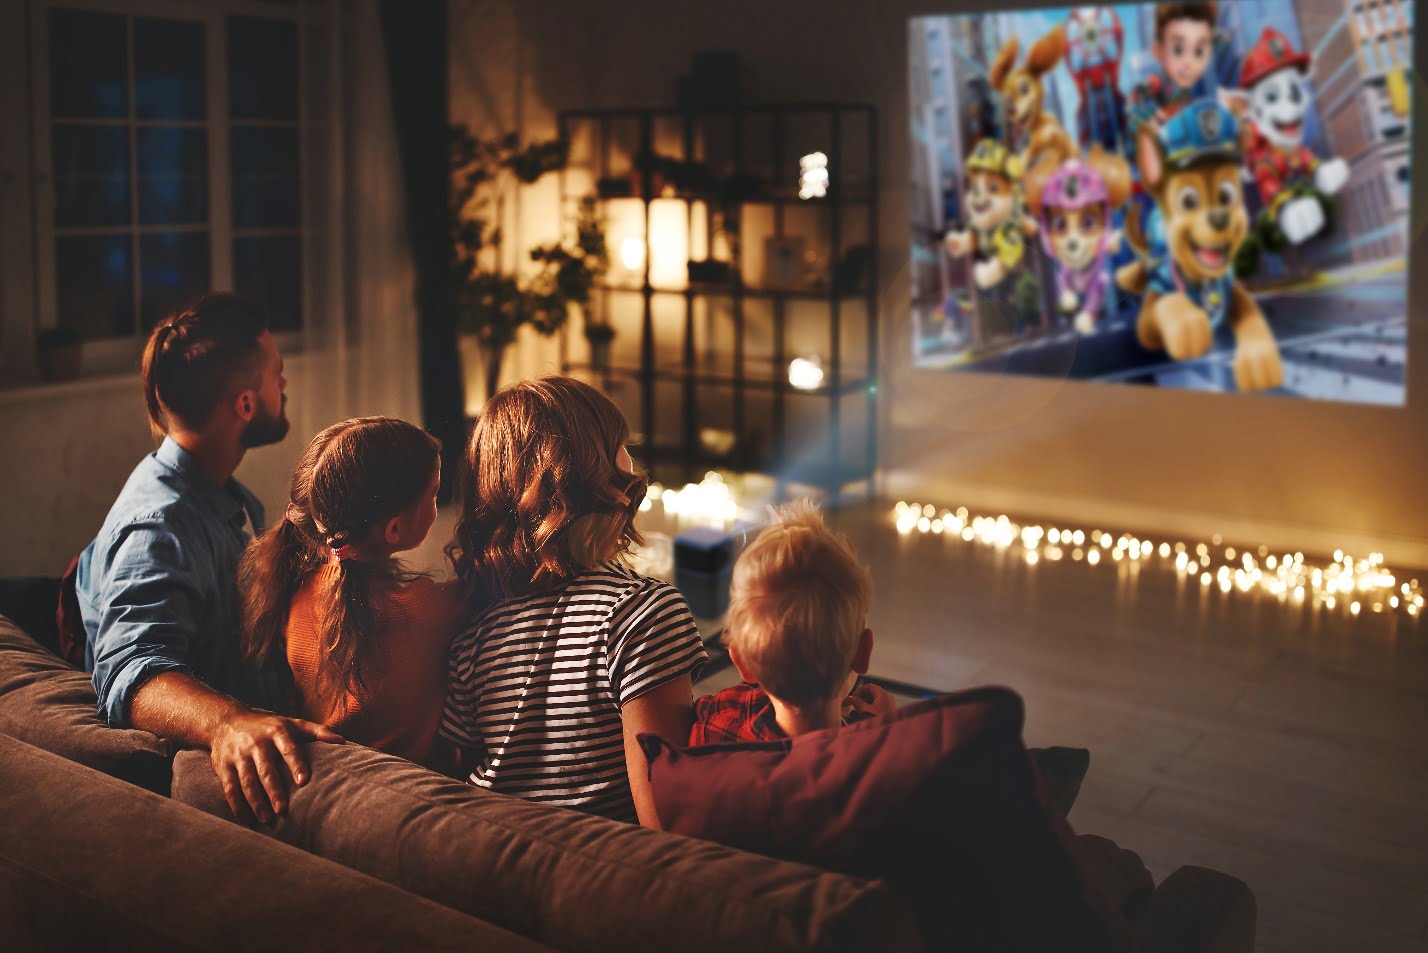 group of people sitting on a couch watching a television as one of Kid Activities to do at Home